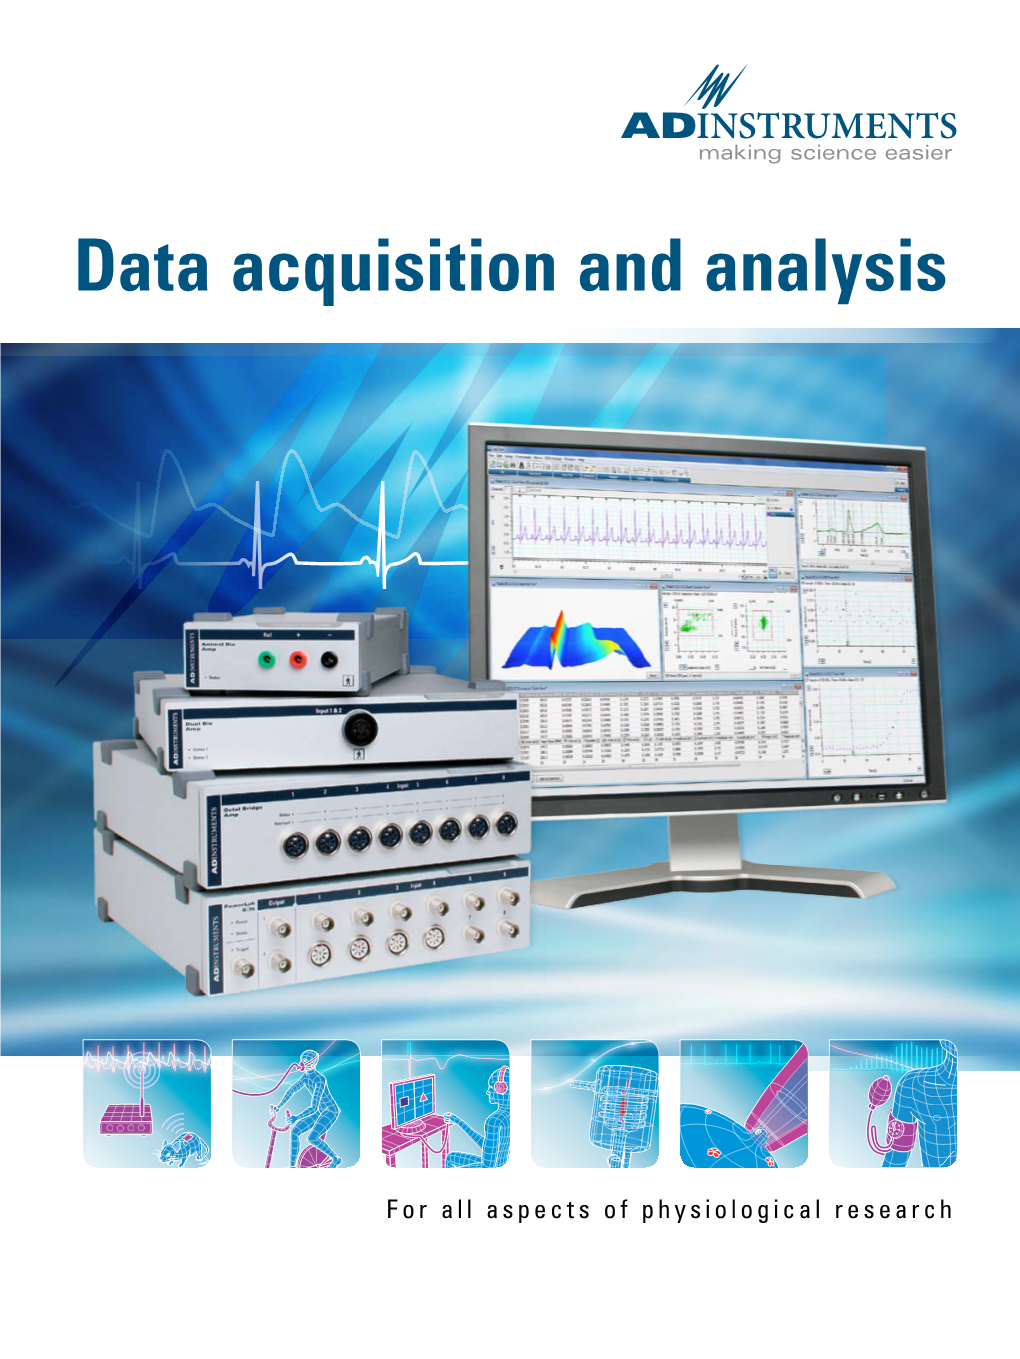 Data Acquisition and Analysis